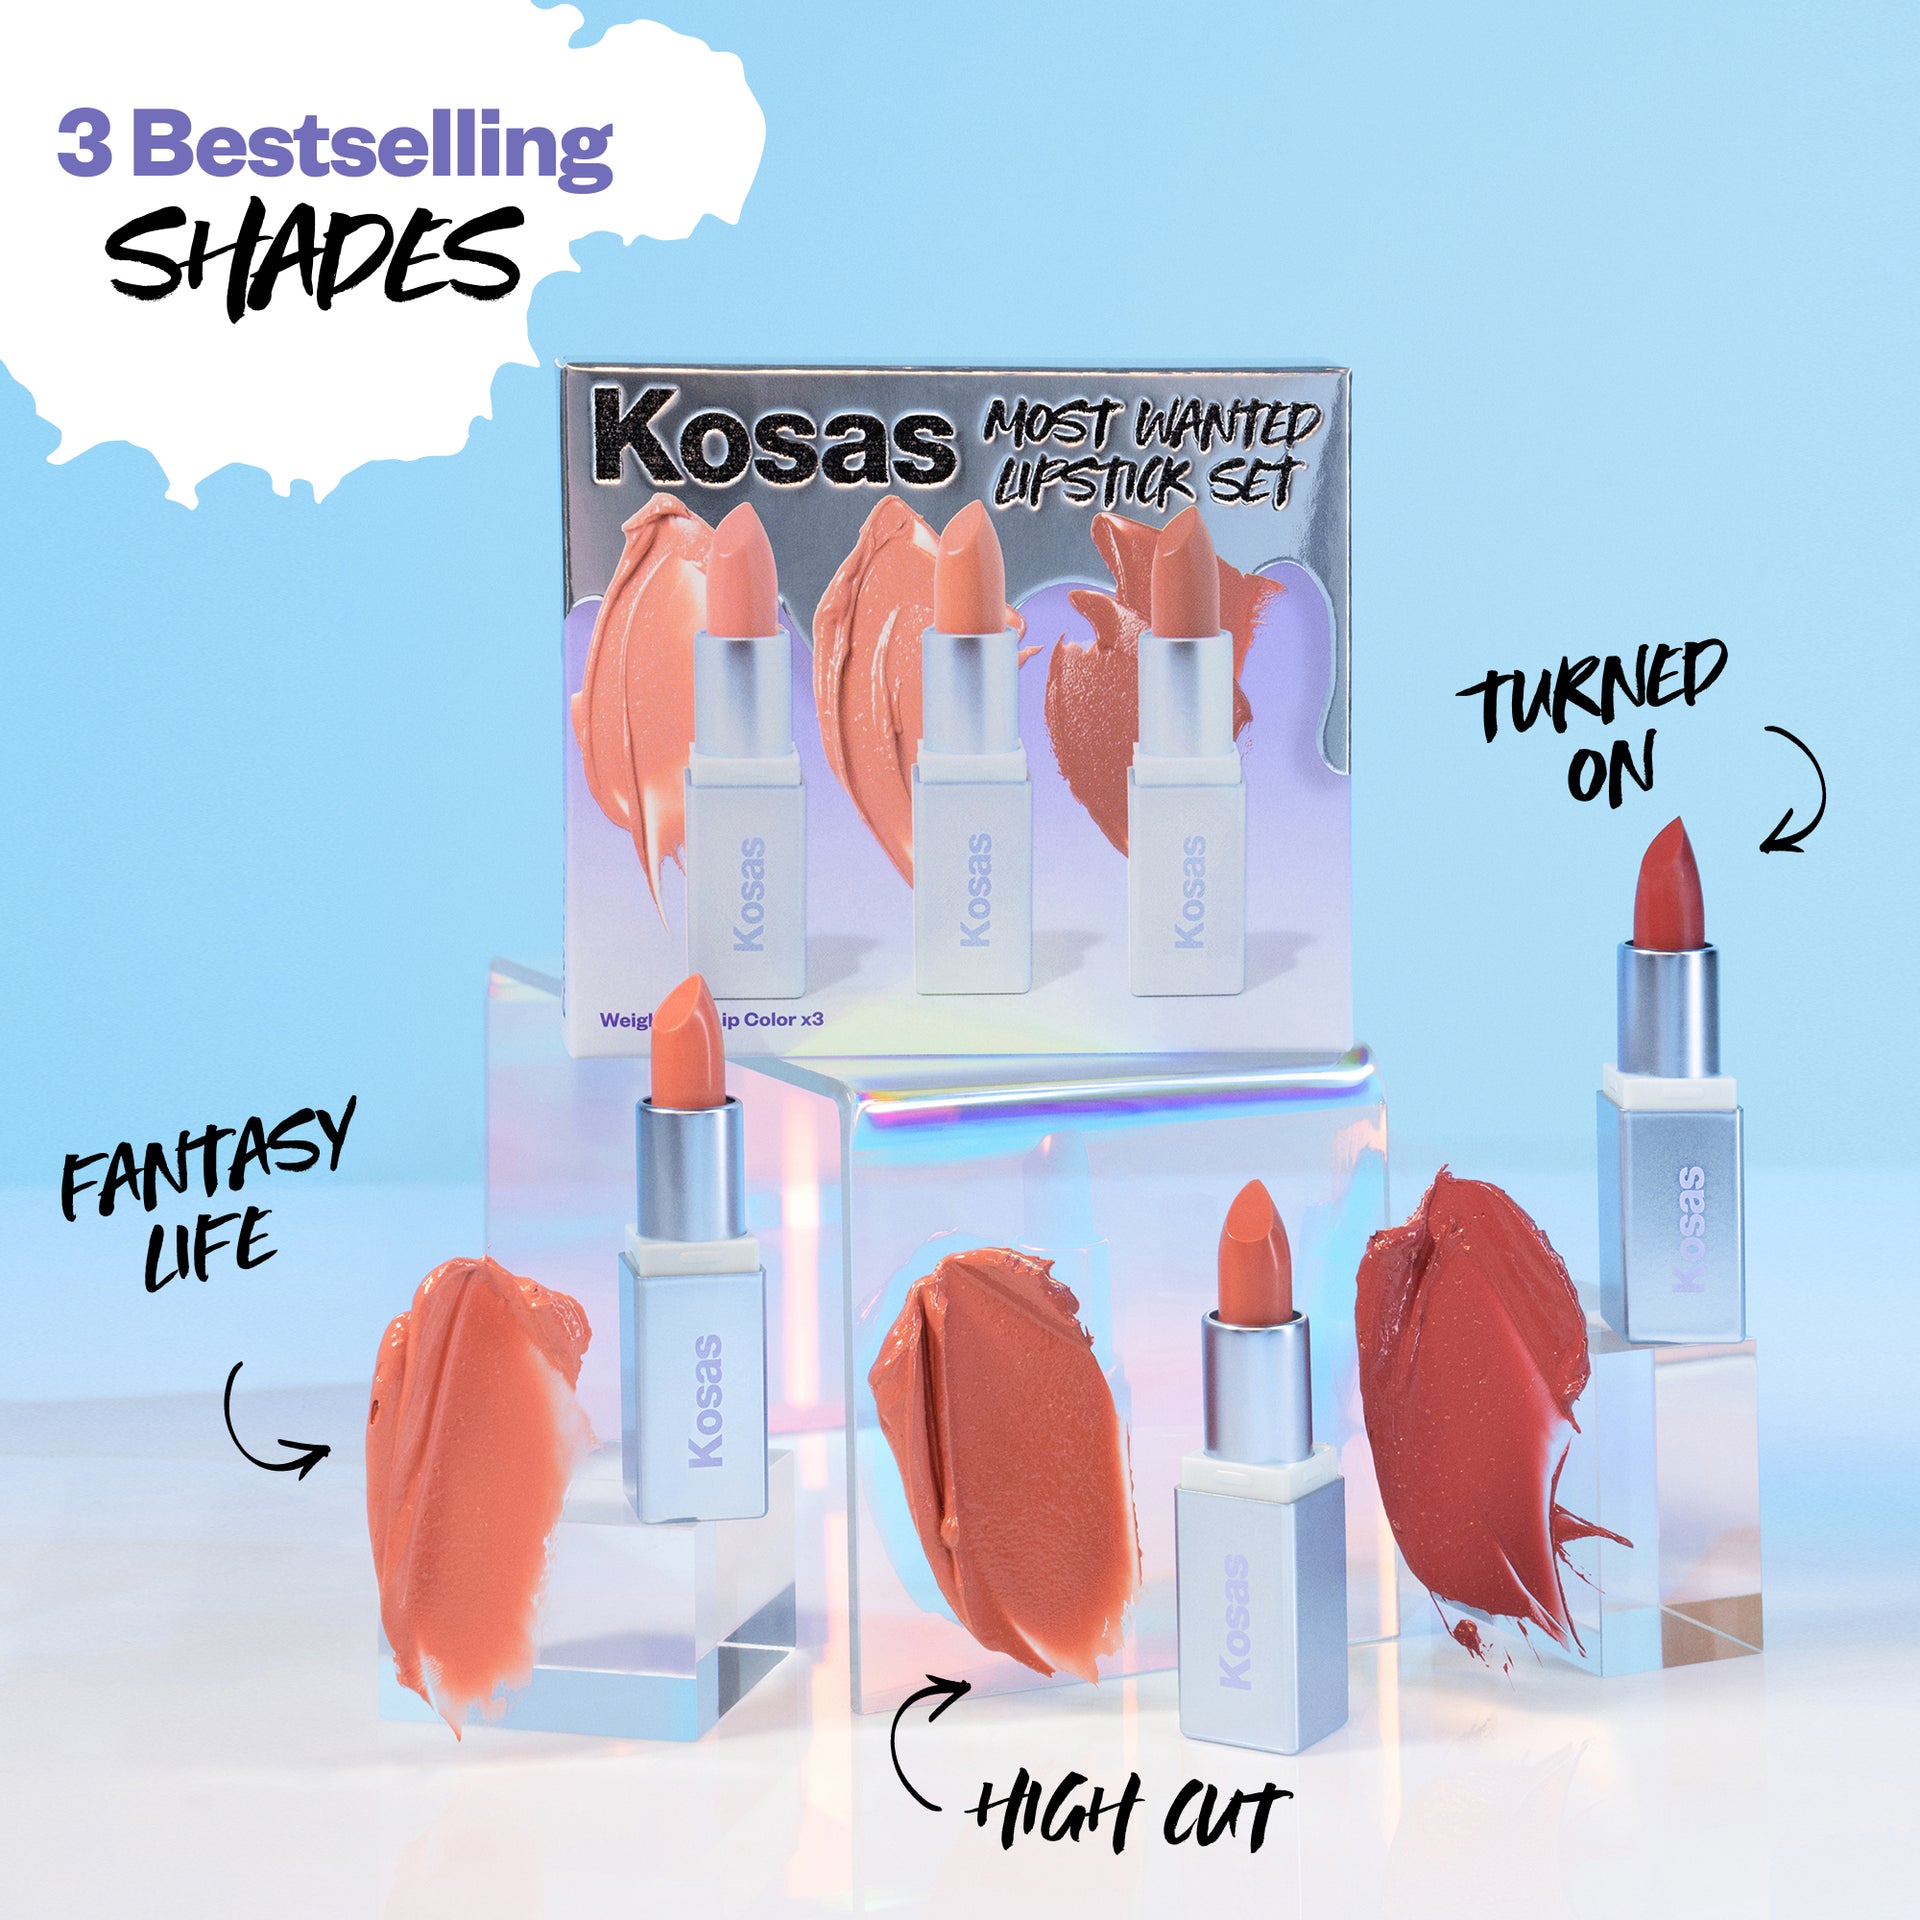 3 Best Selling Shades (Fantasy life, turned on, high cut)